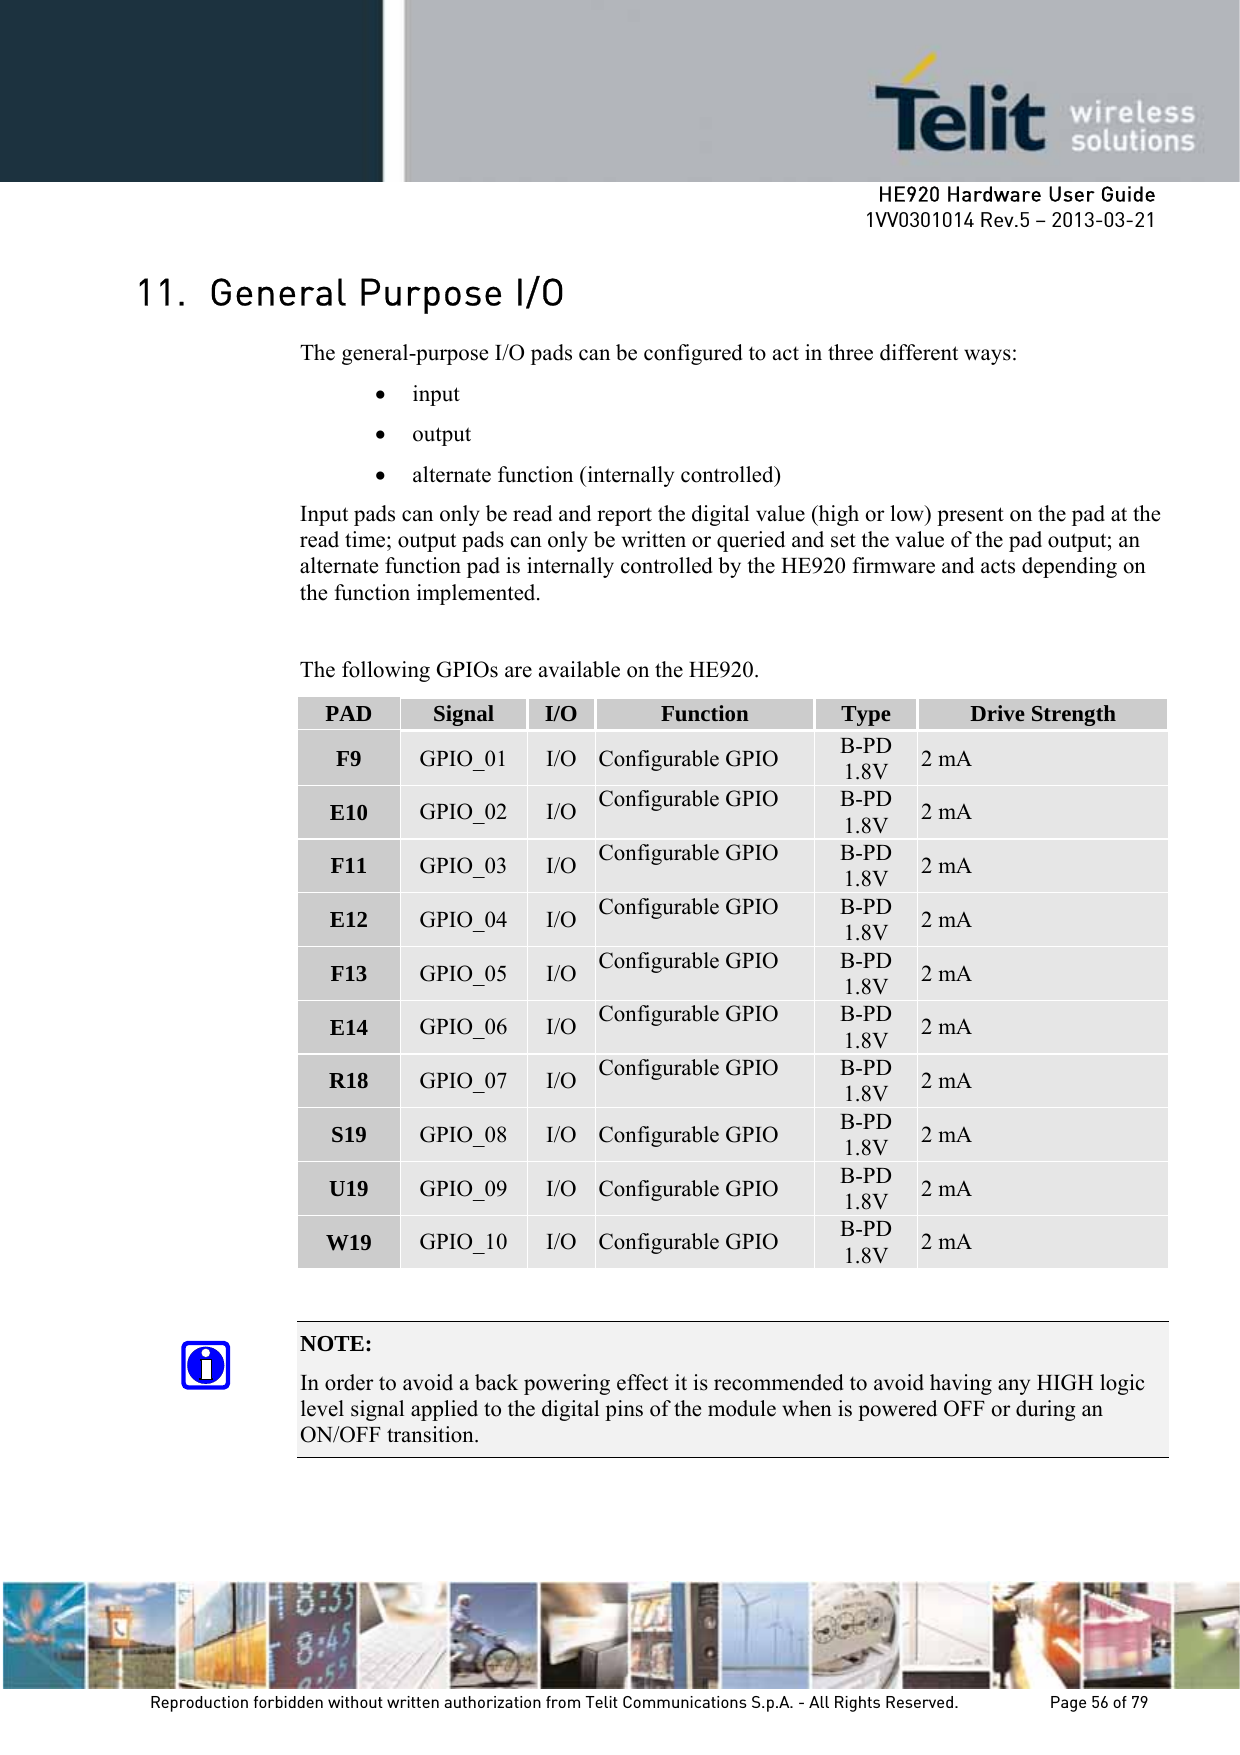     HE920 Hardware User Guide 1VV0301014 Rev.5 – 2013-03-21 Reproduction forbidden without written authorization from Telit Communications S.p.A. - All Rights Reserved.    Page 56 of 79  11. General Purpose I/O The general-purpose I/O pads can be configured to act in three different ways: • input • output • alternate function (internally controlled) Input pads can only be read and report the digital value (high or low) present on the pad at the read time; output pads can only be written or queried and set the value of the pad output; an alternate function pad is internally controlled by the HE920 firmware and acts depending on the function implemented.  The following GPIOs are available on the HE920. PAD  Signal  I/O Function  Type  Drive Strength F9  GPIO_01  I/O Configurable GPIO  B-PD 1.8V  2 mA E10  GPIO_02  I/O Configurable GPIO  B-PD 1.8V  2 mA F11  GPIO_03  I/O Configurable GPIO  B-PD 1.8V  2 mA E12  GPIO_04  I/O Configurable GPIO  B-PD 1.8V  2 mA F13  GPIO_05  I/O Configurable GPIO  B-PD 1.8V  2 mA E14  GPIO_06  I/O Configurable GPIO  B-PD 1.8V  2 mA R18  GPIO_07  I/O Configurable GPIO  B-PD 1.8V  2 mA S19  GPIO_08  I/O Configurable GPIO  B-PD 1.8V  2 mA U19  GPIO_09  I/O Configurable GPIO  B-PD 1.8V  2 mA W19  GPIO_10  I/O Configurable GPIO  B-PD 1.8V  2 mA  NOTE:  In order to avoid a back powering effect it is recommended to avoid having any HIGH logic level signal applied to the digital pins of the module when is powered OFF or during an ON/OFF transition.   